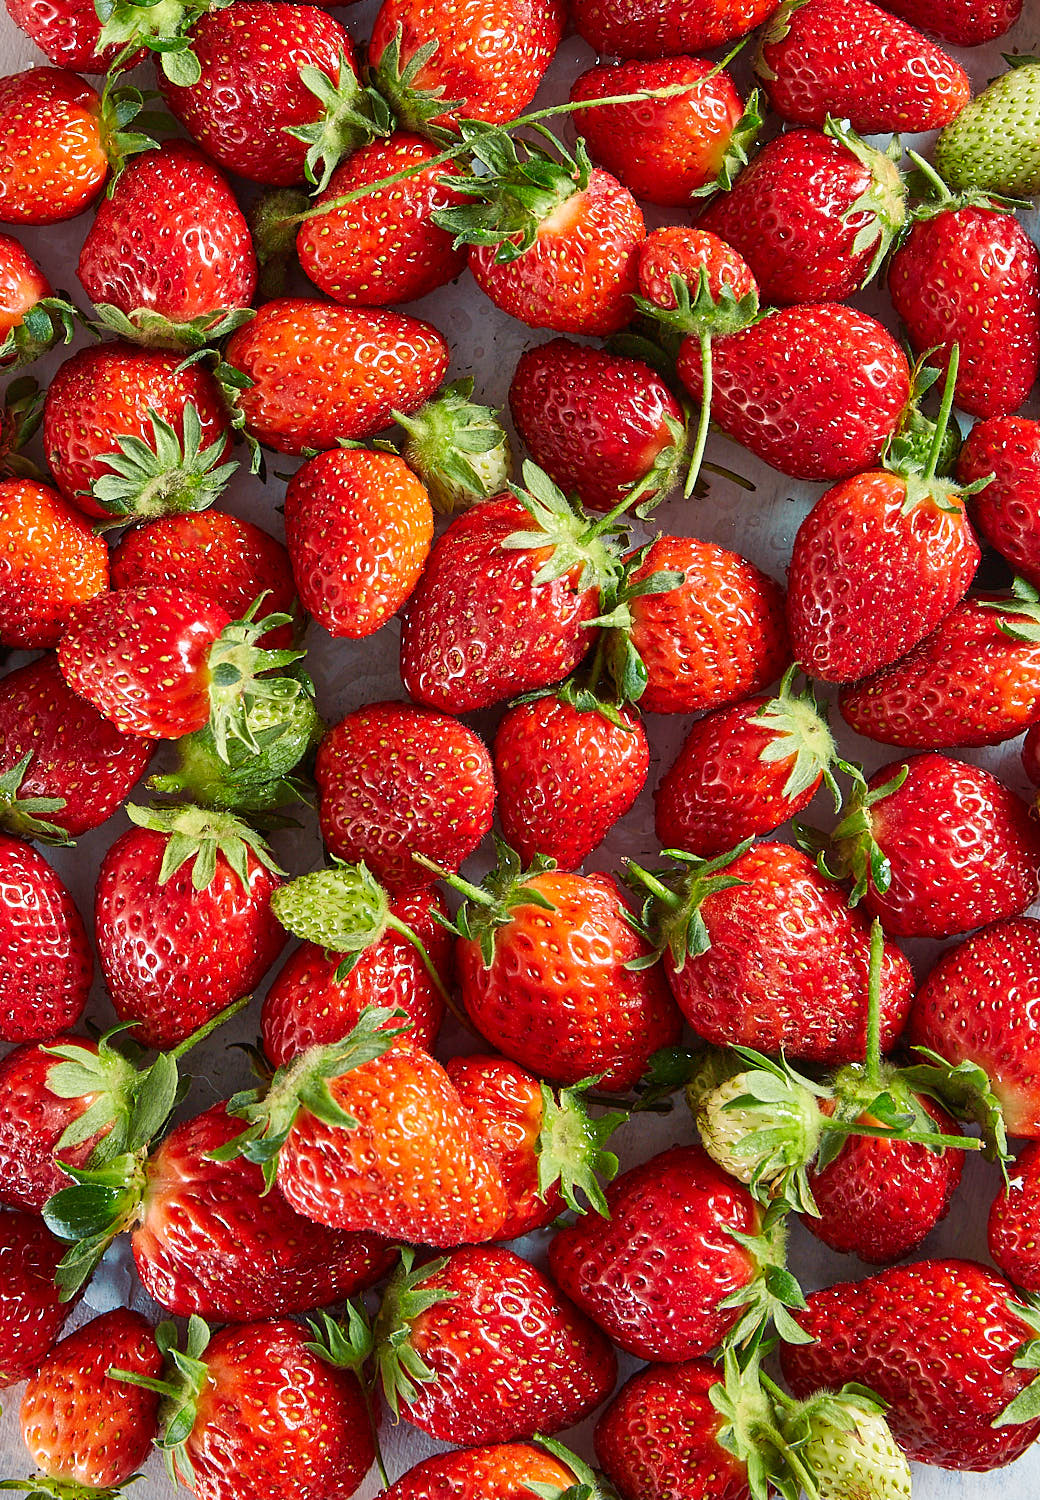 Strawberries on a surface